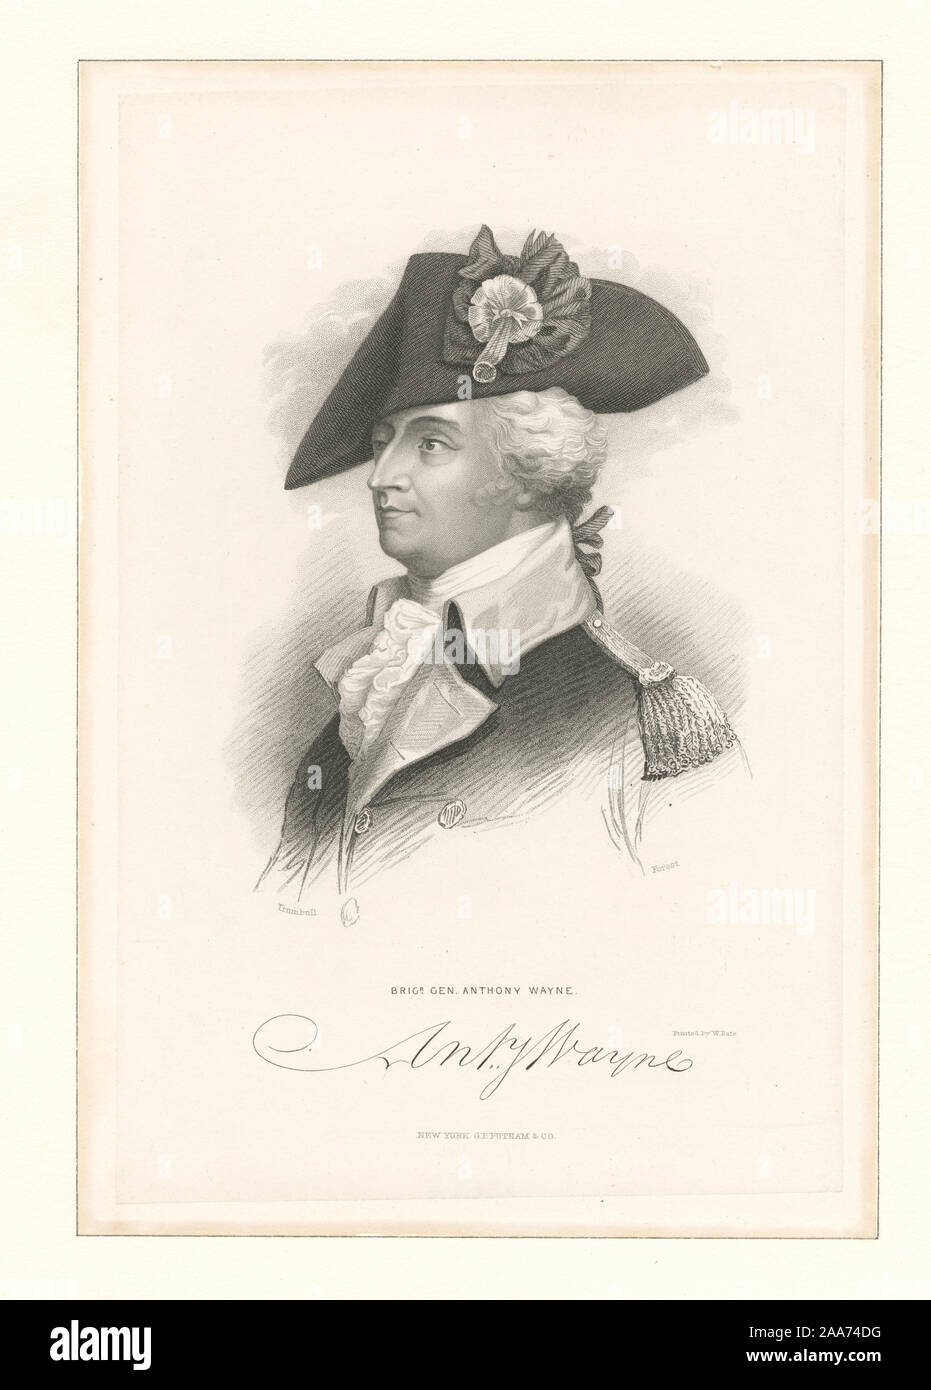 Printmakers include Asher Brown Durand, H.B. Hall, Max Rosenthal and John Sartain. Title from Calendar of the Emmet Collection. EM7996 Statement of responsibility : Forrest; Brigr. Gen. Anthony Wayne Stock Photo